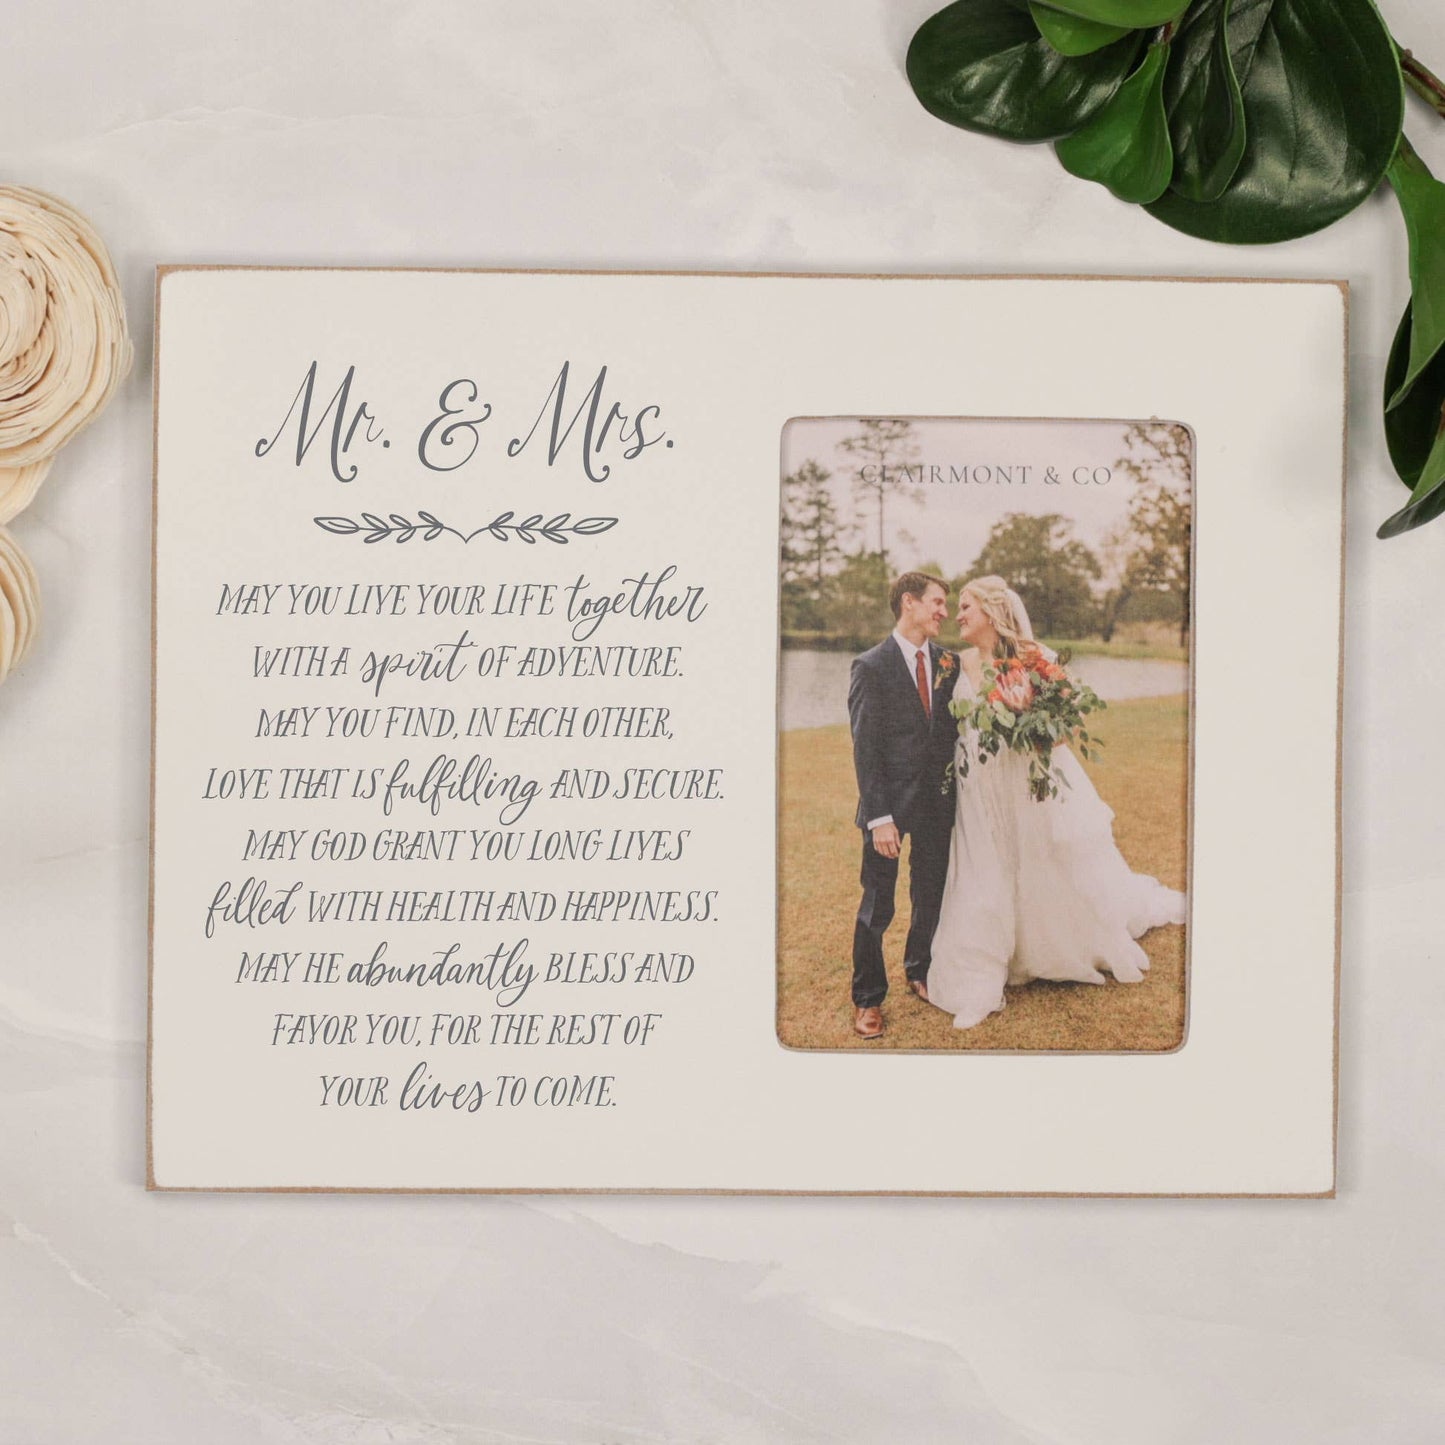 Mr. & Mrs. (May Your Lives) Picture Frame